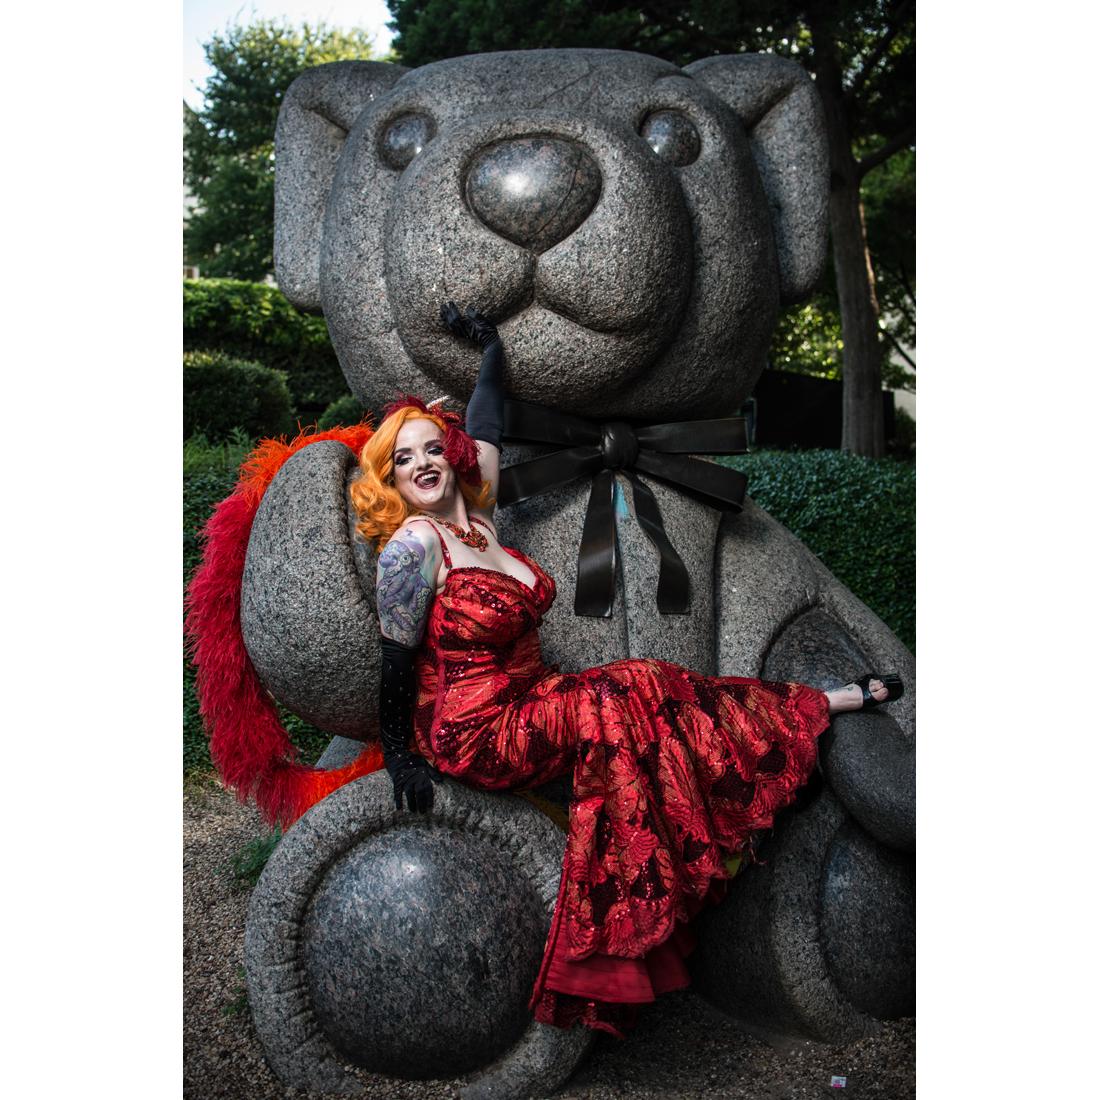 Vivienne by Can Turkyilmaz. Bright red dress posing on a teddy bear sculpture For Sale 3